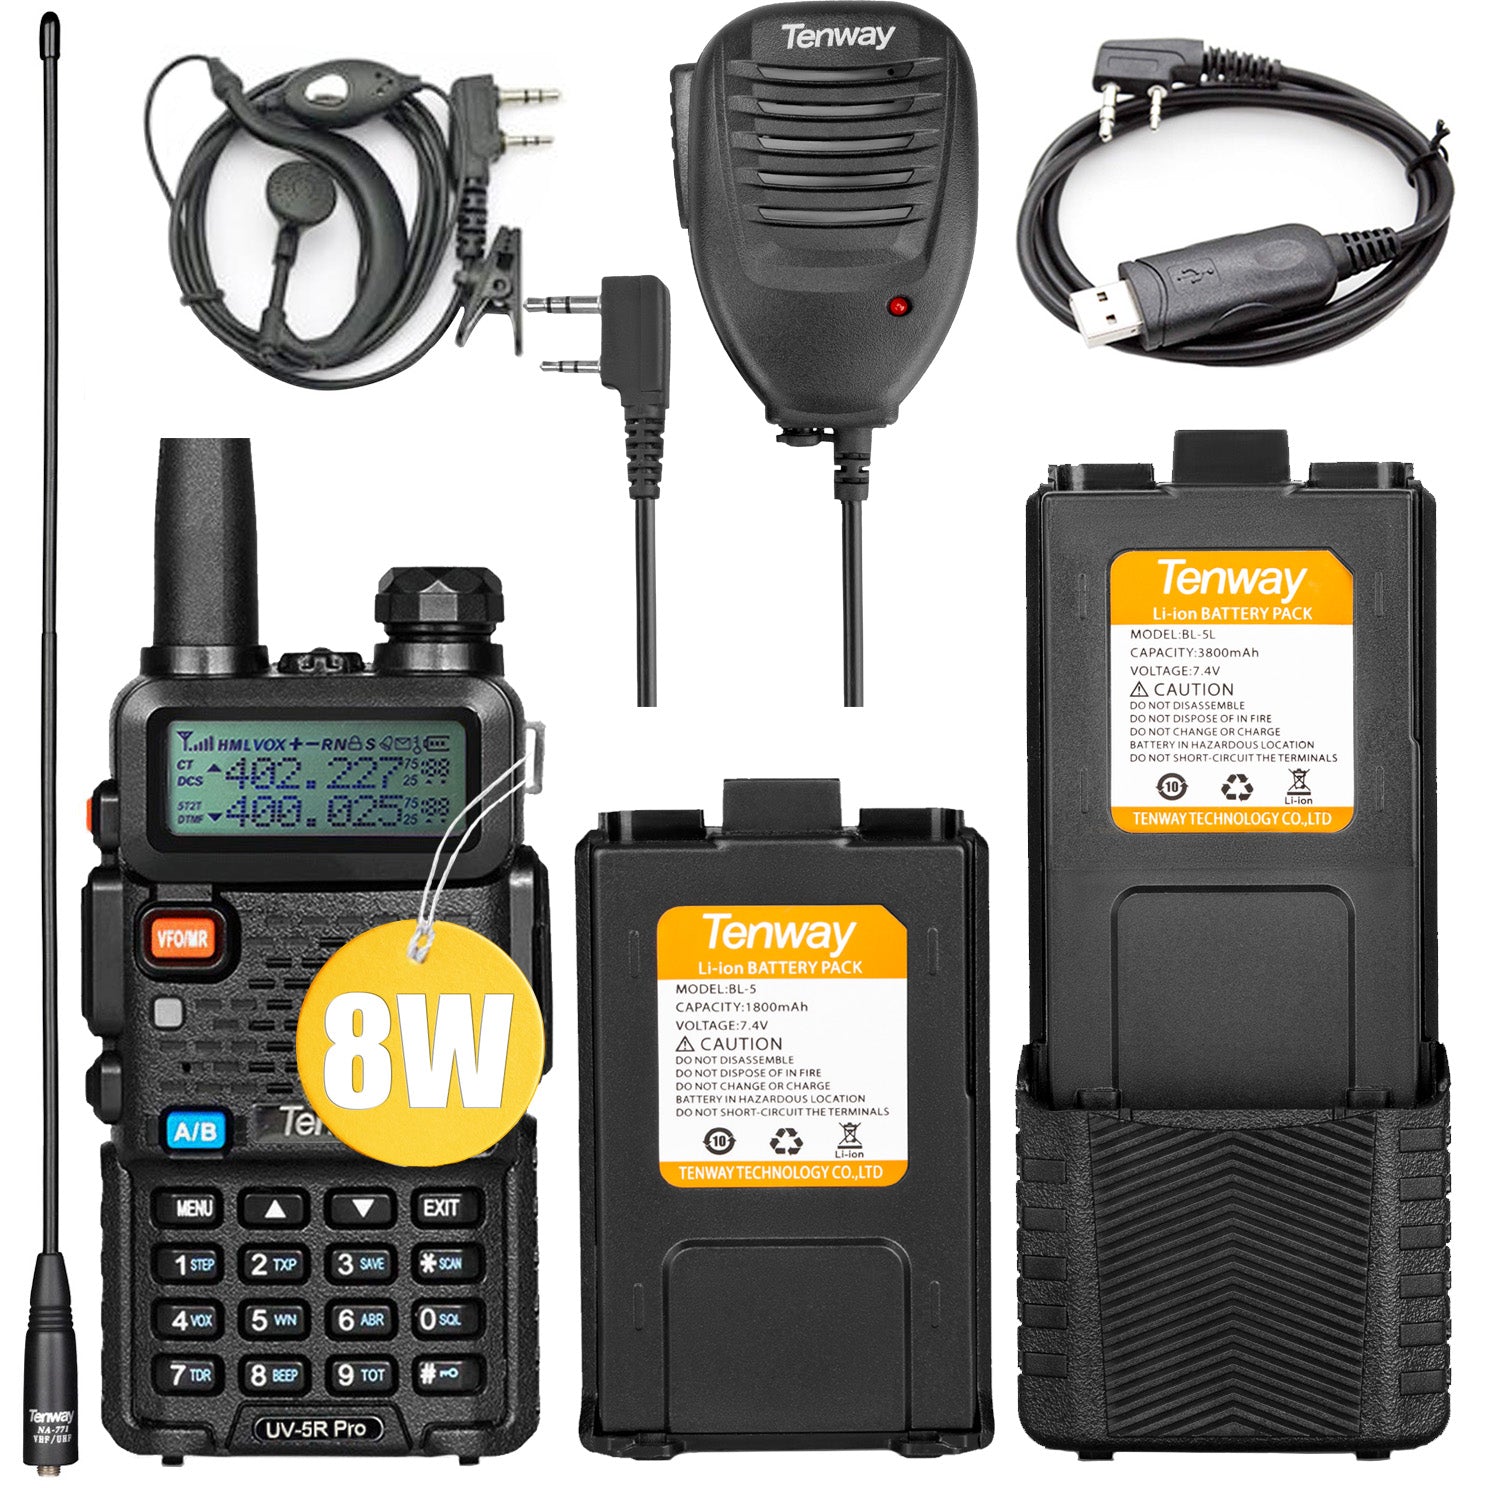 BAOFENG UV-5R 8W Ham Radio Handheld Dual Band 2-Way with an Extra 3800mAh Battery with BAOFENG Hand Mic and Programming Cable - 1